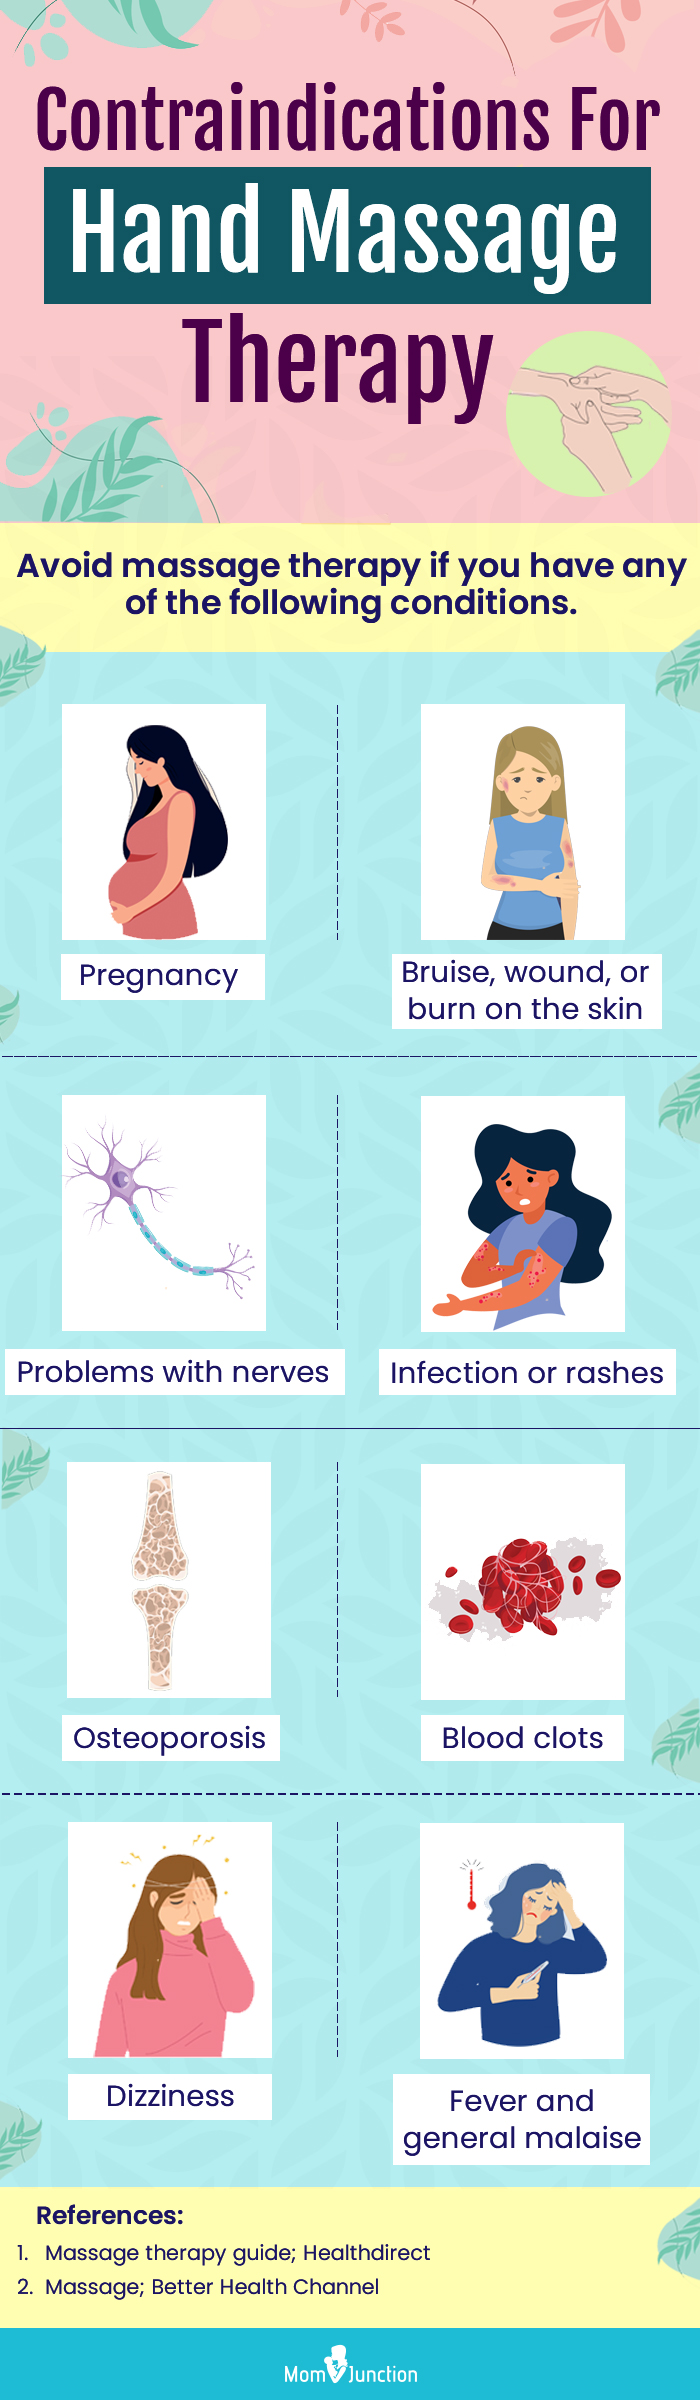 Contradictions For Hand Massage Therapy (infographic)